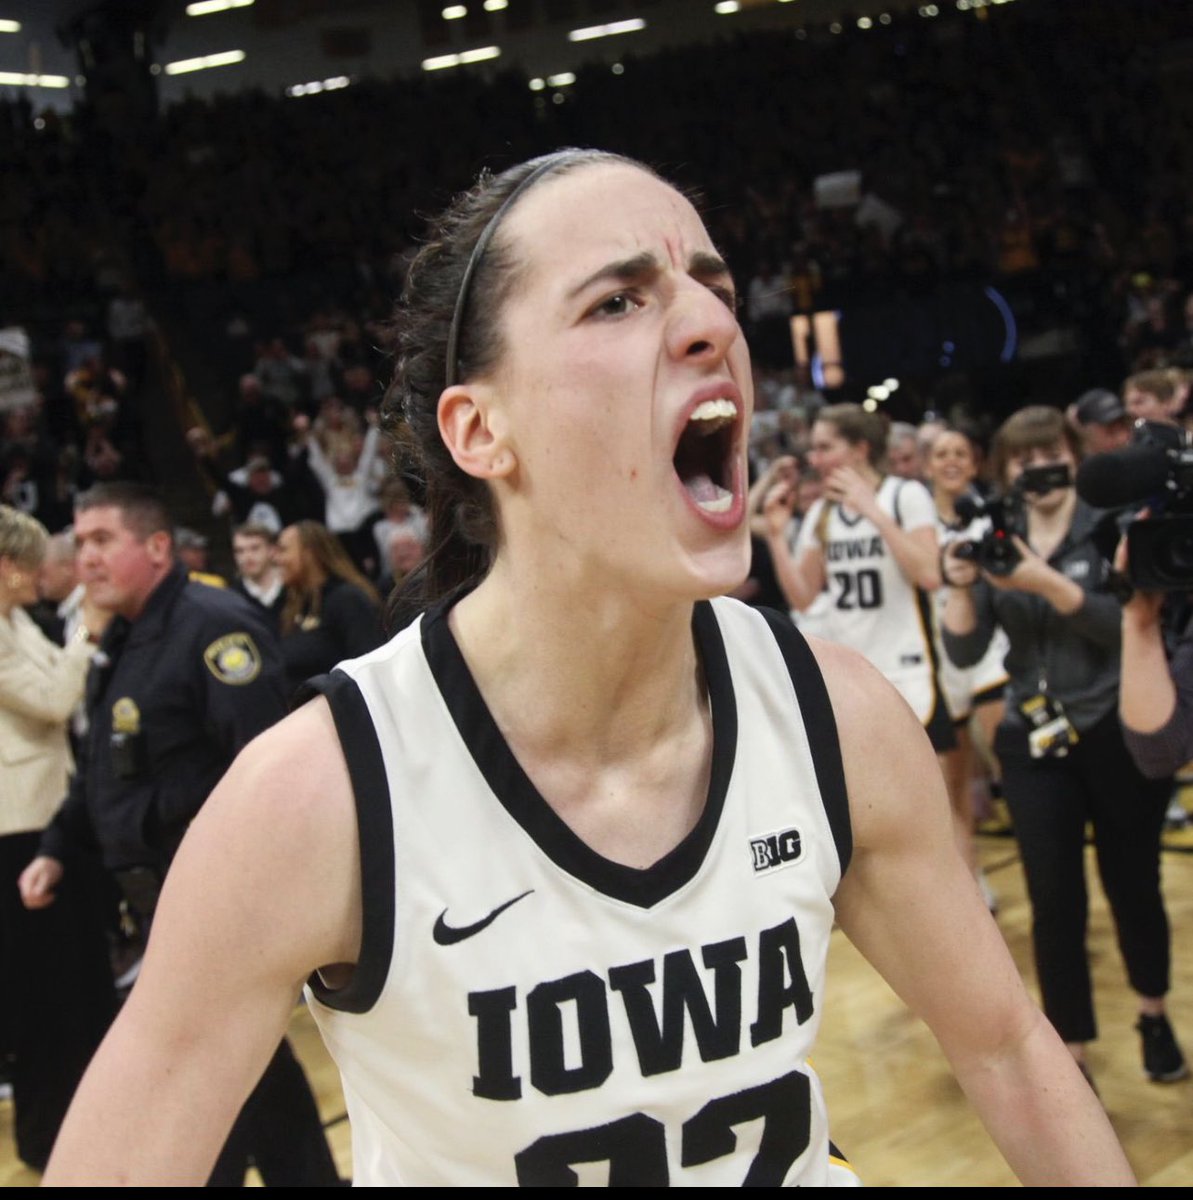 Karma at its finest! Glad the thugs on the LSU team got beat by Iowa and Caitlin Clark! NCAA womens basketball at its finest! #LSU #Iowa #IOWAvsLSU #LSUvsIowa #Caitlinclark #AngelReese